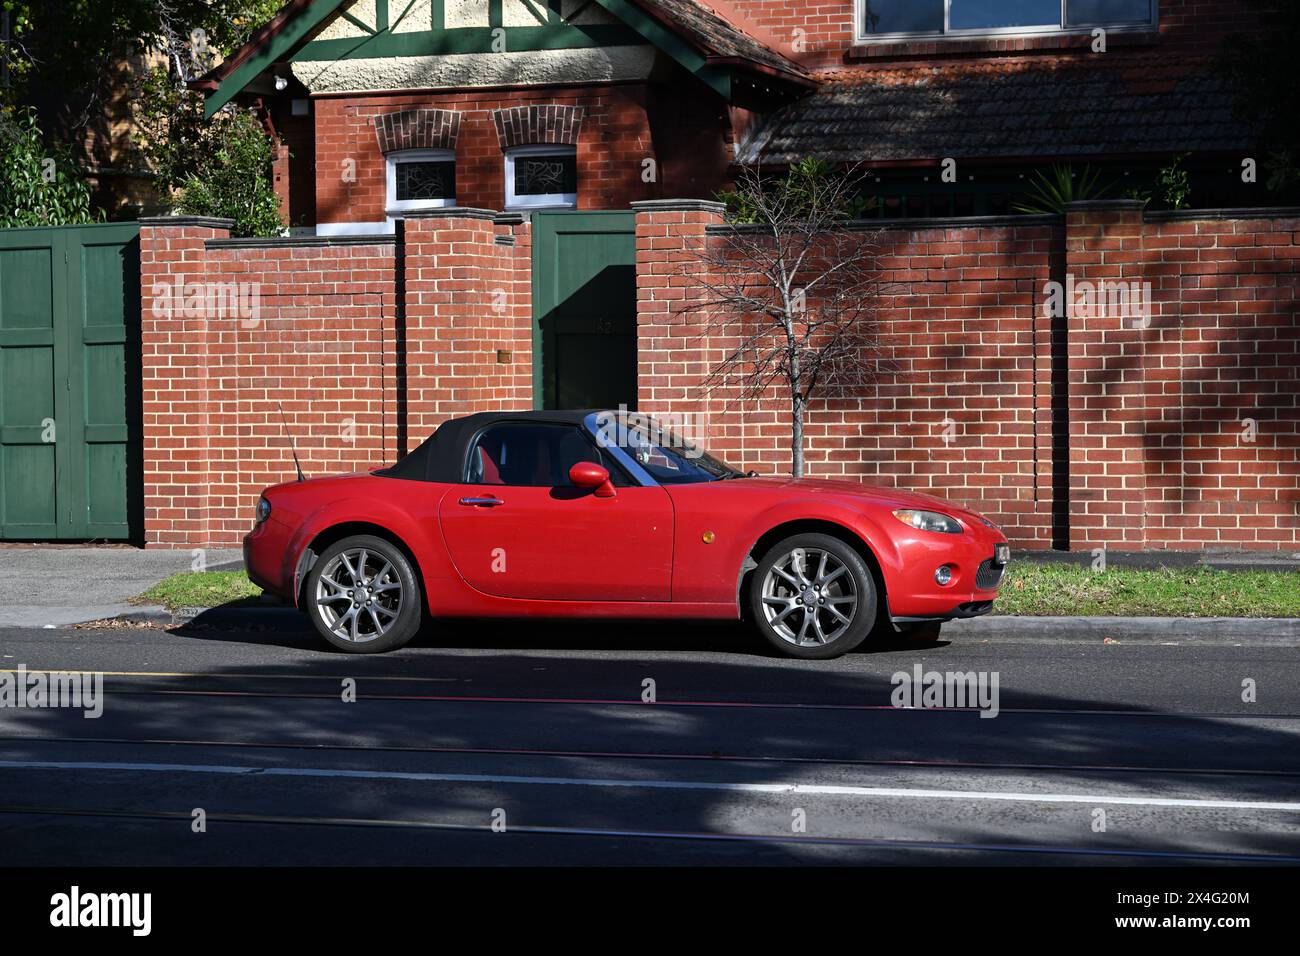 Side view of a bright red Mazda MX-5 convertible, parked in the street outside a suburban home with a red brick wall, during a sunny day Stock Photo